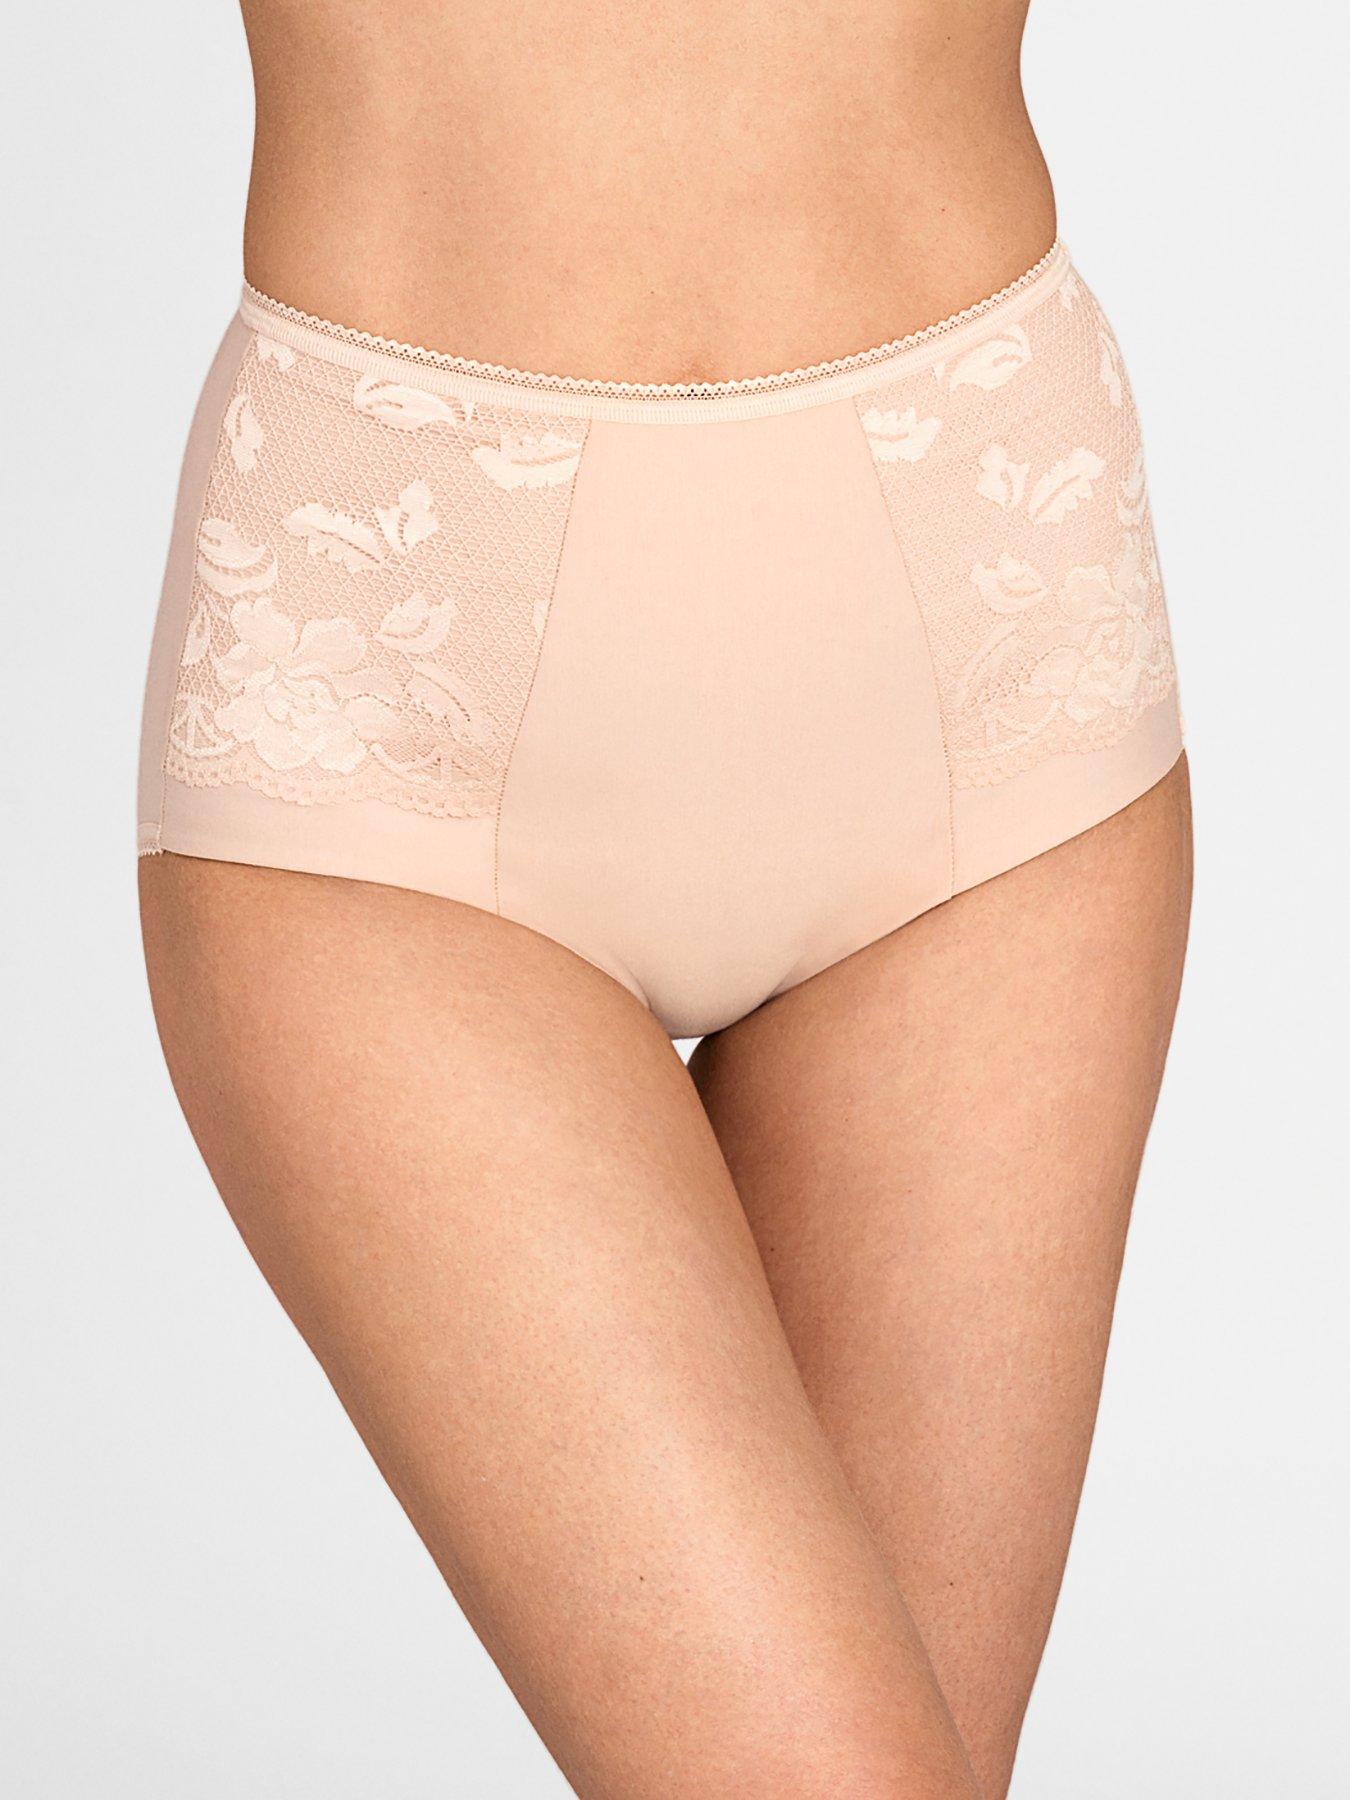 Miss Mary of Sweden Lovely Lace Panty Girdle - Beige | very.co.uk